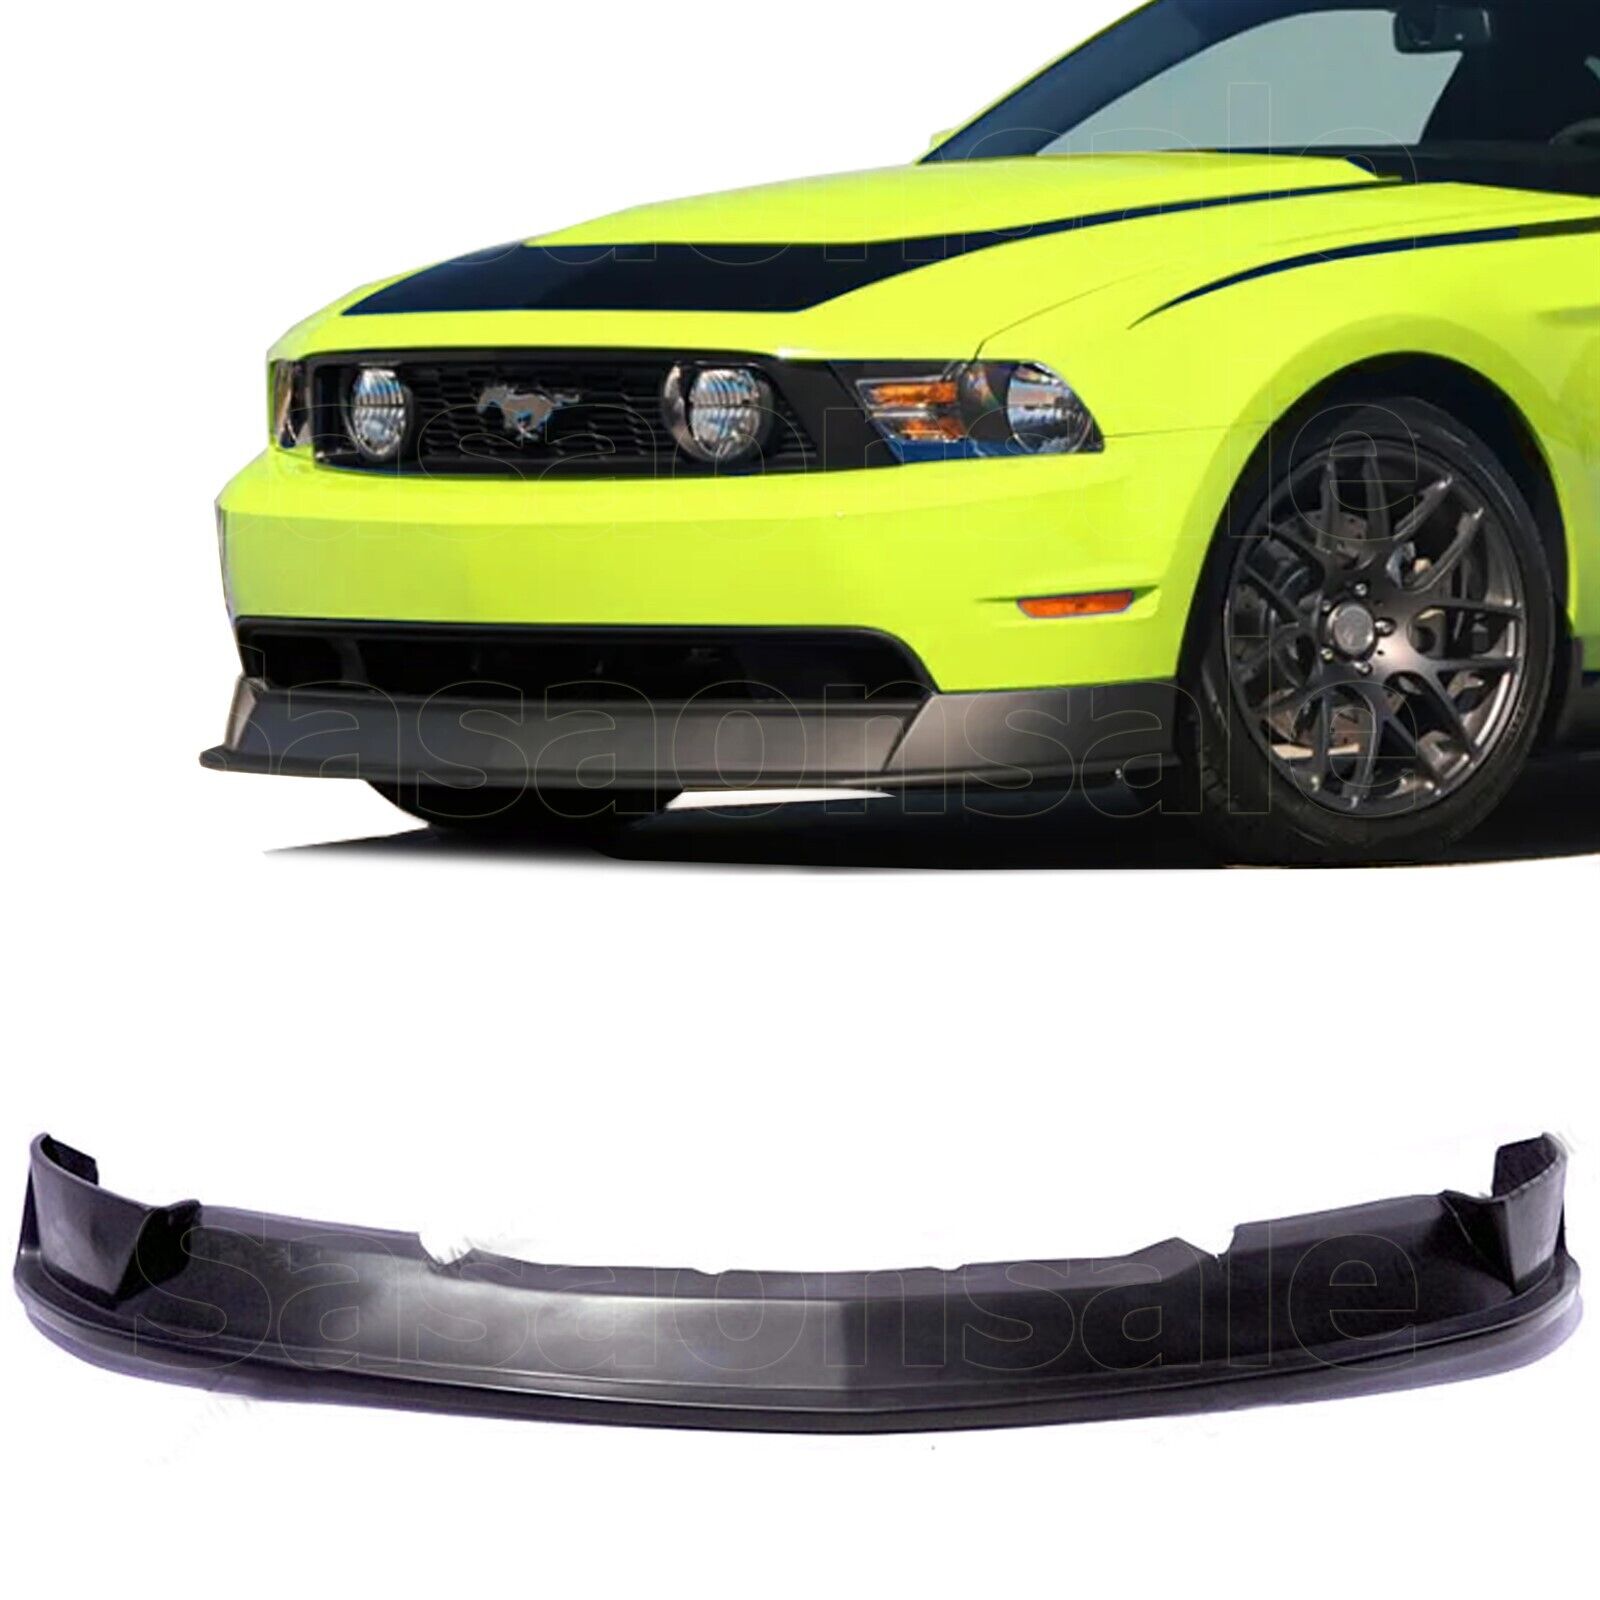 [SASA] Fit for 10-12 Ford Mustang V8 GT Only RT500 PU Front Bumper Lip Splitter